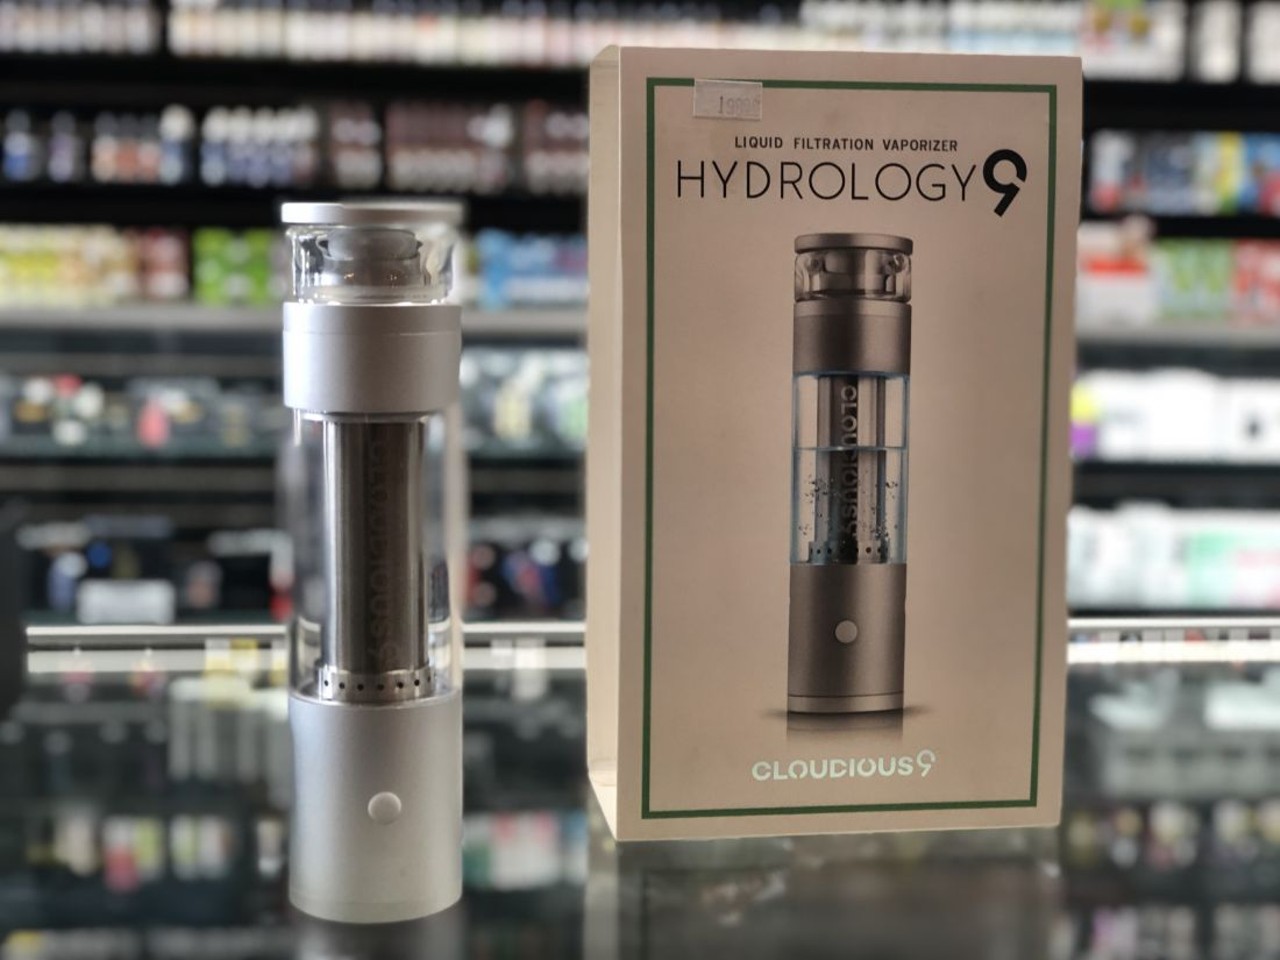 Hydrology9, water filtration vape, $199
Detroit Smoke and Vape
4718 Anthony Wayne Dr., Detroit; 313-462-8143
For the Star Wars vaper: Called the &#147;lightsaber of vaporizers,&#148; the Hydrology9 water filtration vape is one of a kind. Made from spacecraft-grade aluminum alloy, the &#147;tunnel tube&#148; boasts an anti-leak, anti-rust, built-in filtration system for a cleaner and smoother inhalation and lowers carcinogen intake. Oh, and it looks pretty dank when you fire it up.
MT file photo.